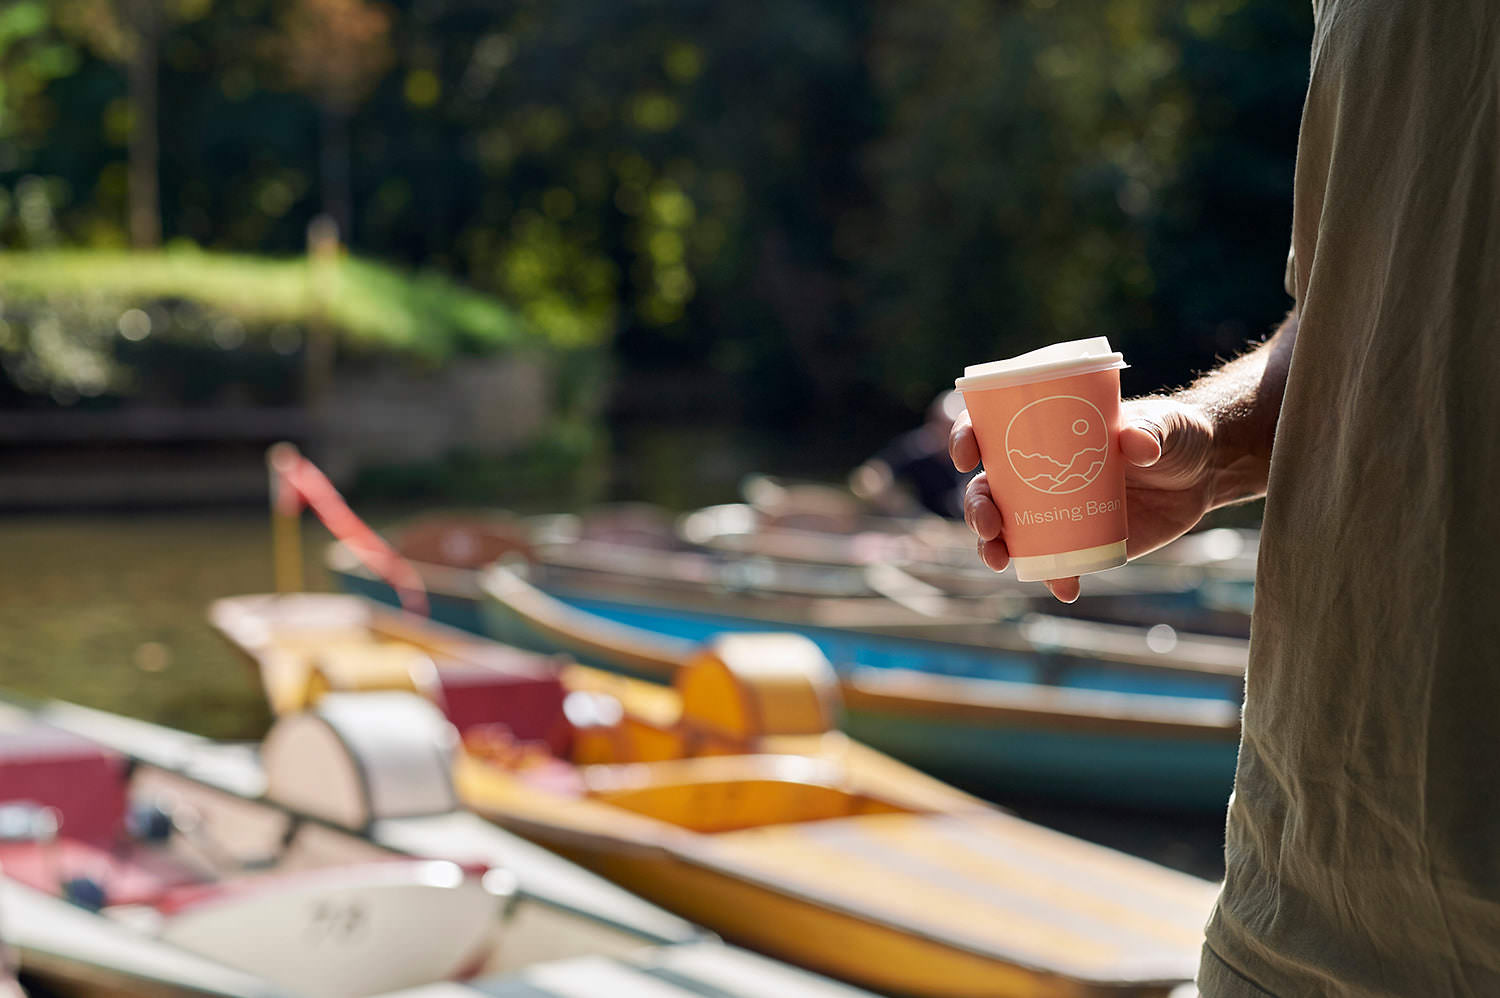 A man holding a pink Missing Bean takeaway coffee cup in front of rental boats on the Isis river in Oxford